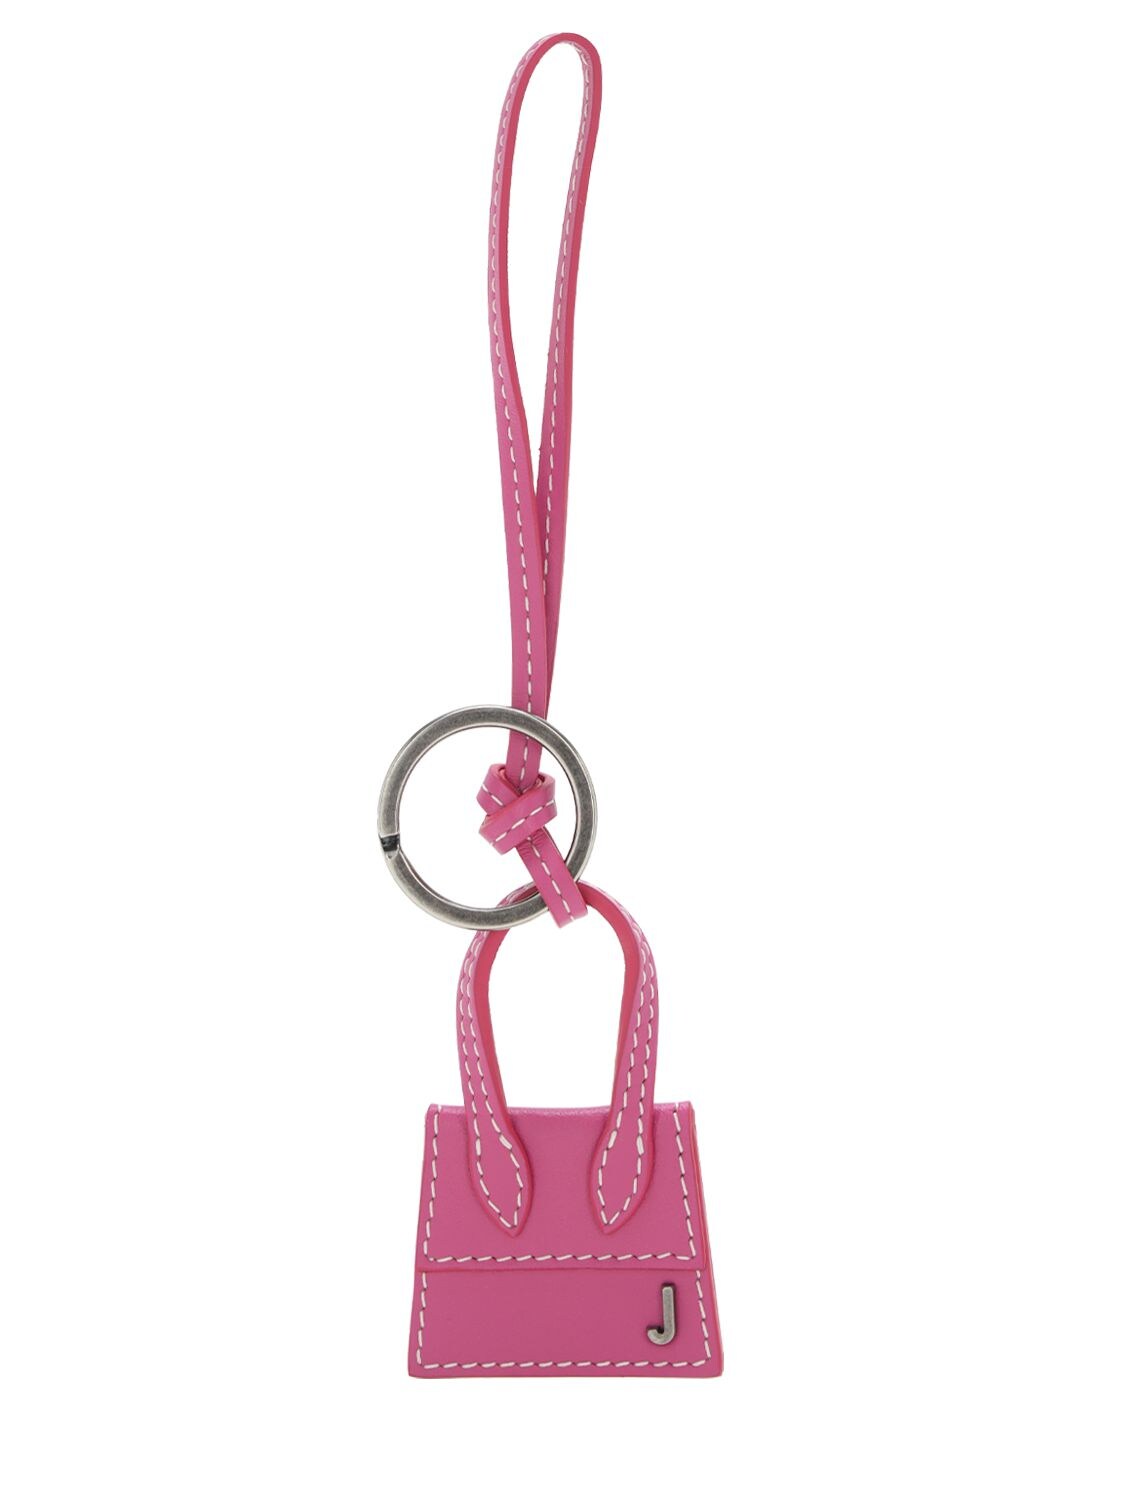 Jacquemus Le Porte Cles Chiquito Key Holder In Pink